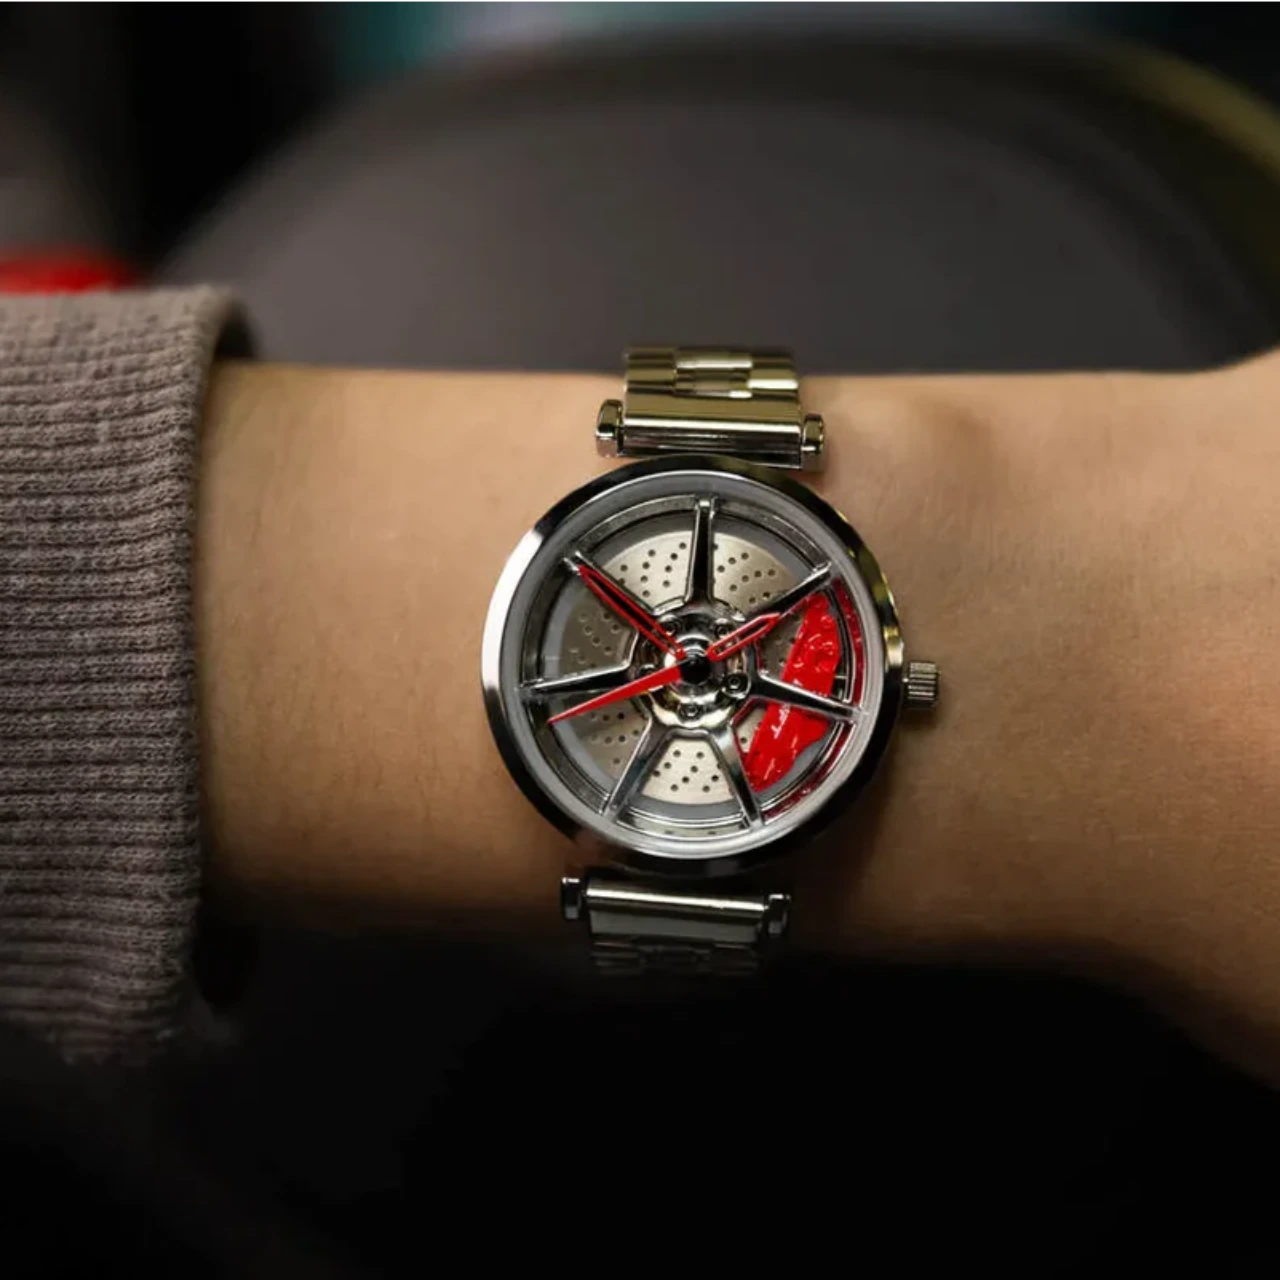 Enhance your fashion with our silver women's Rim Watch! Meticulously crafted by a German startup, these precision watches showcase innovative design. Designed to captivate motorsport, tuning, and auto enthusiasts. #id_46744378933578